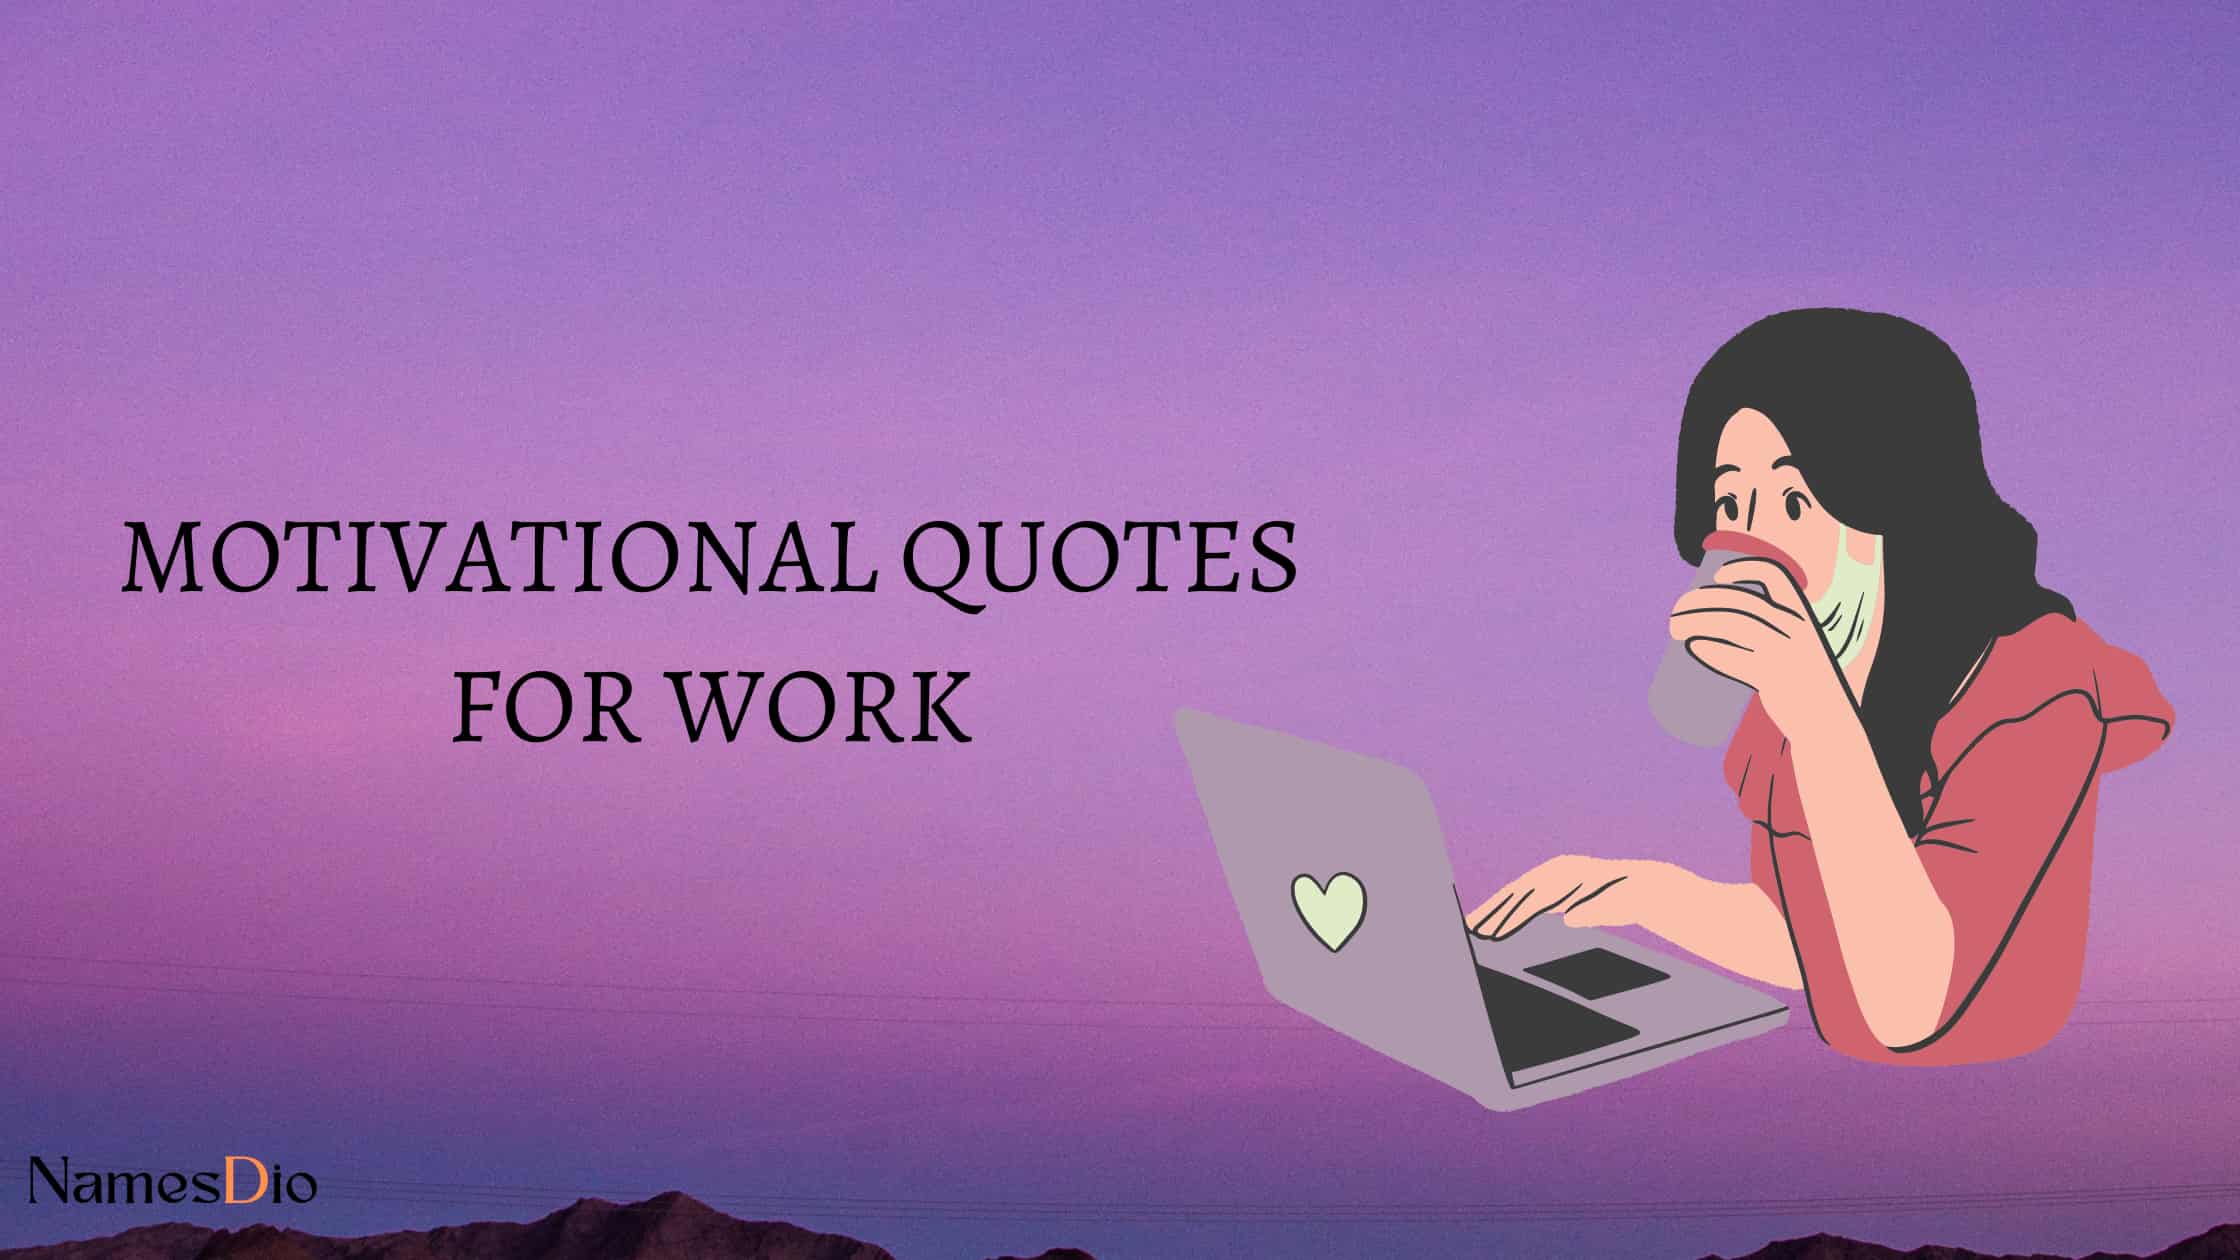 Motivational-Quotes-for-Work